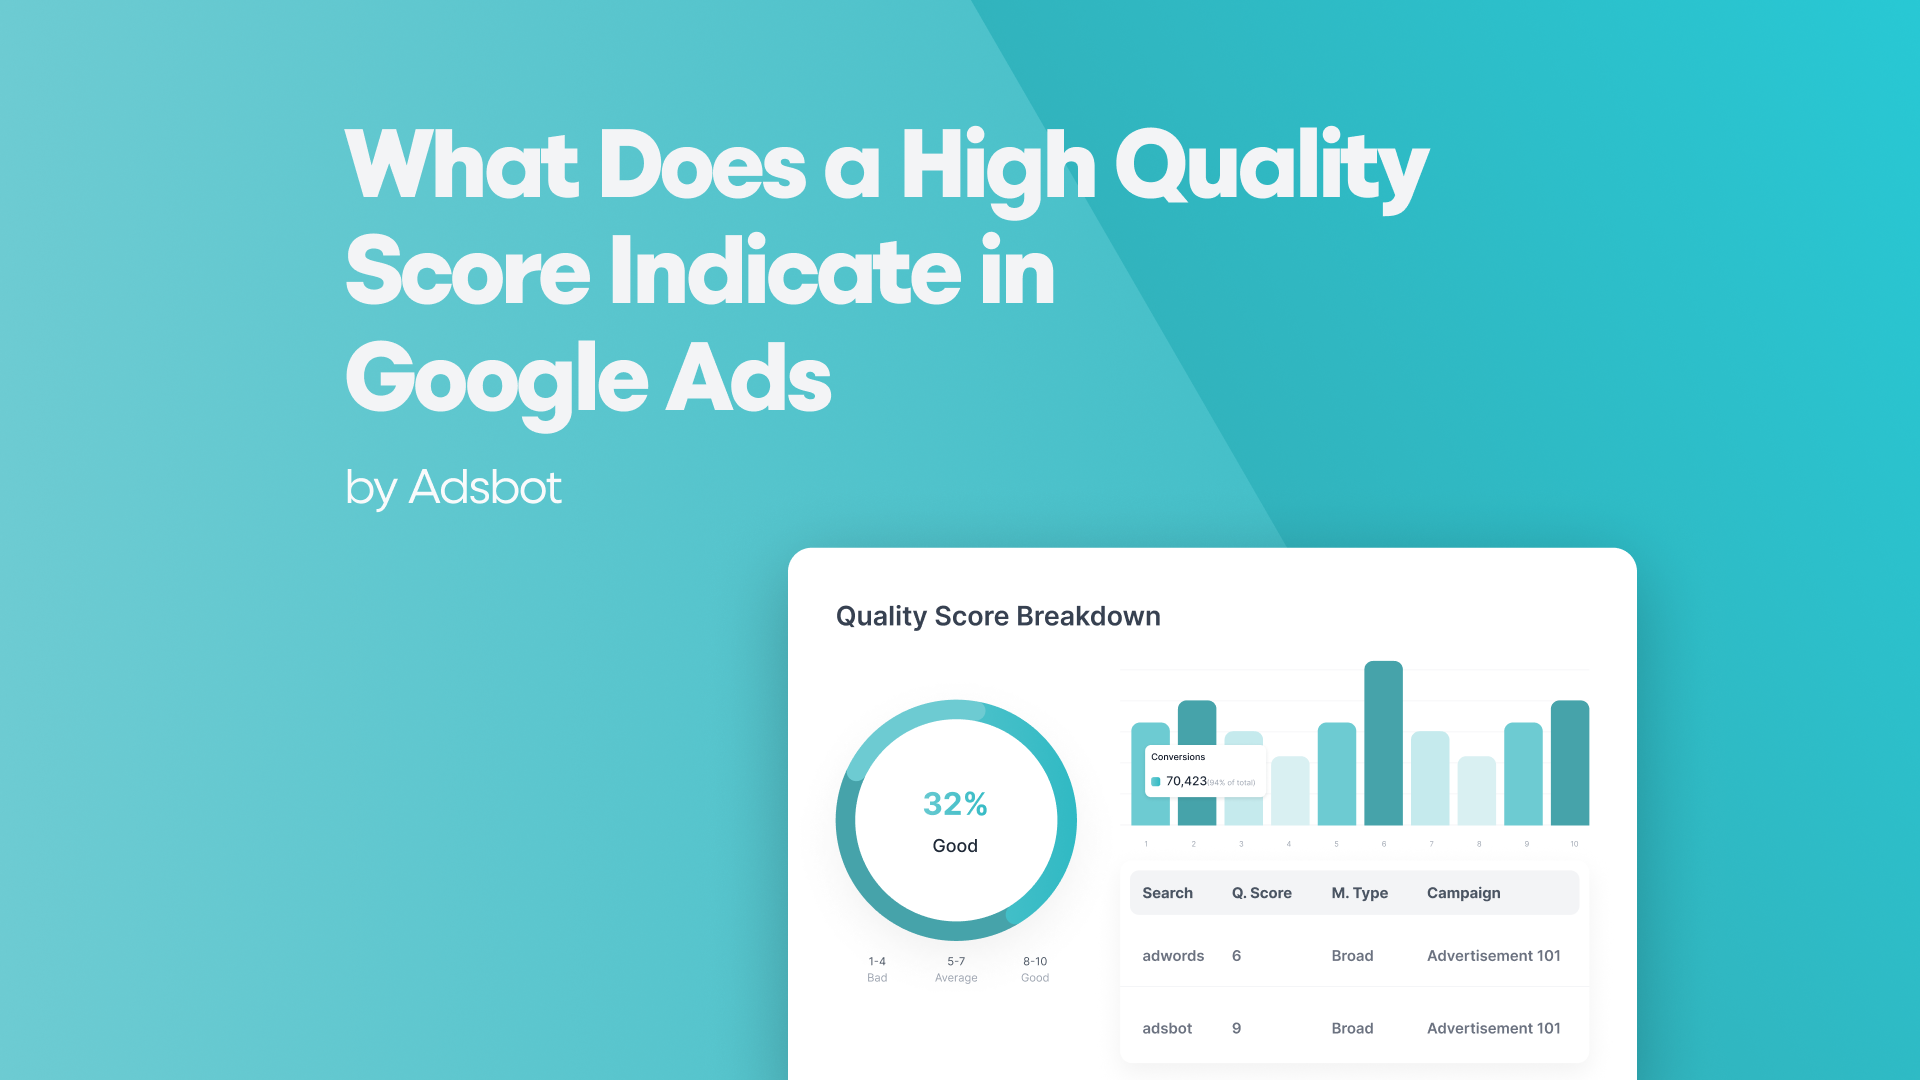 What Does a High Quality Score Indicate in Google Ads